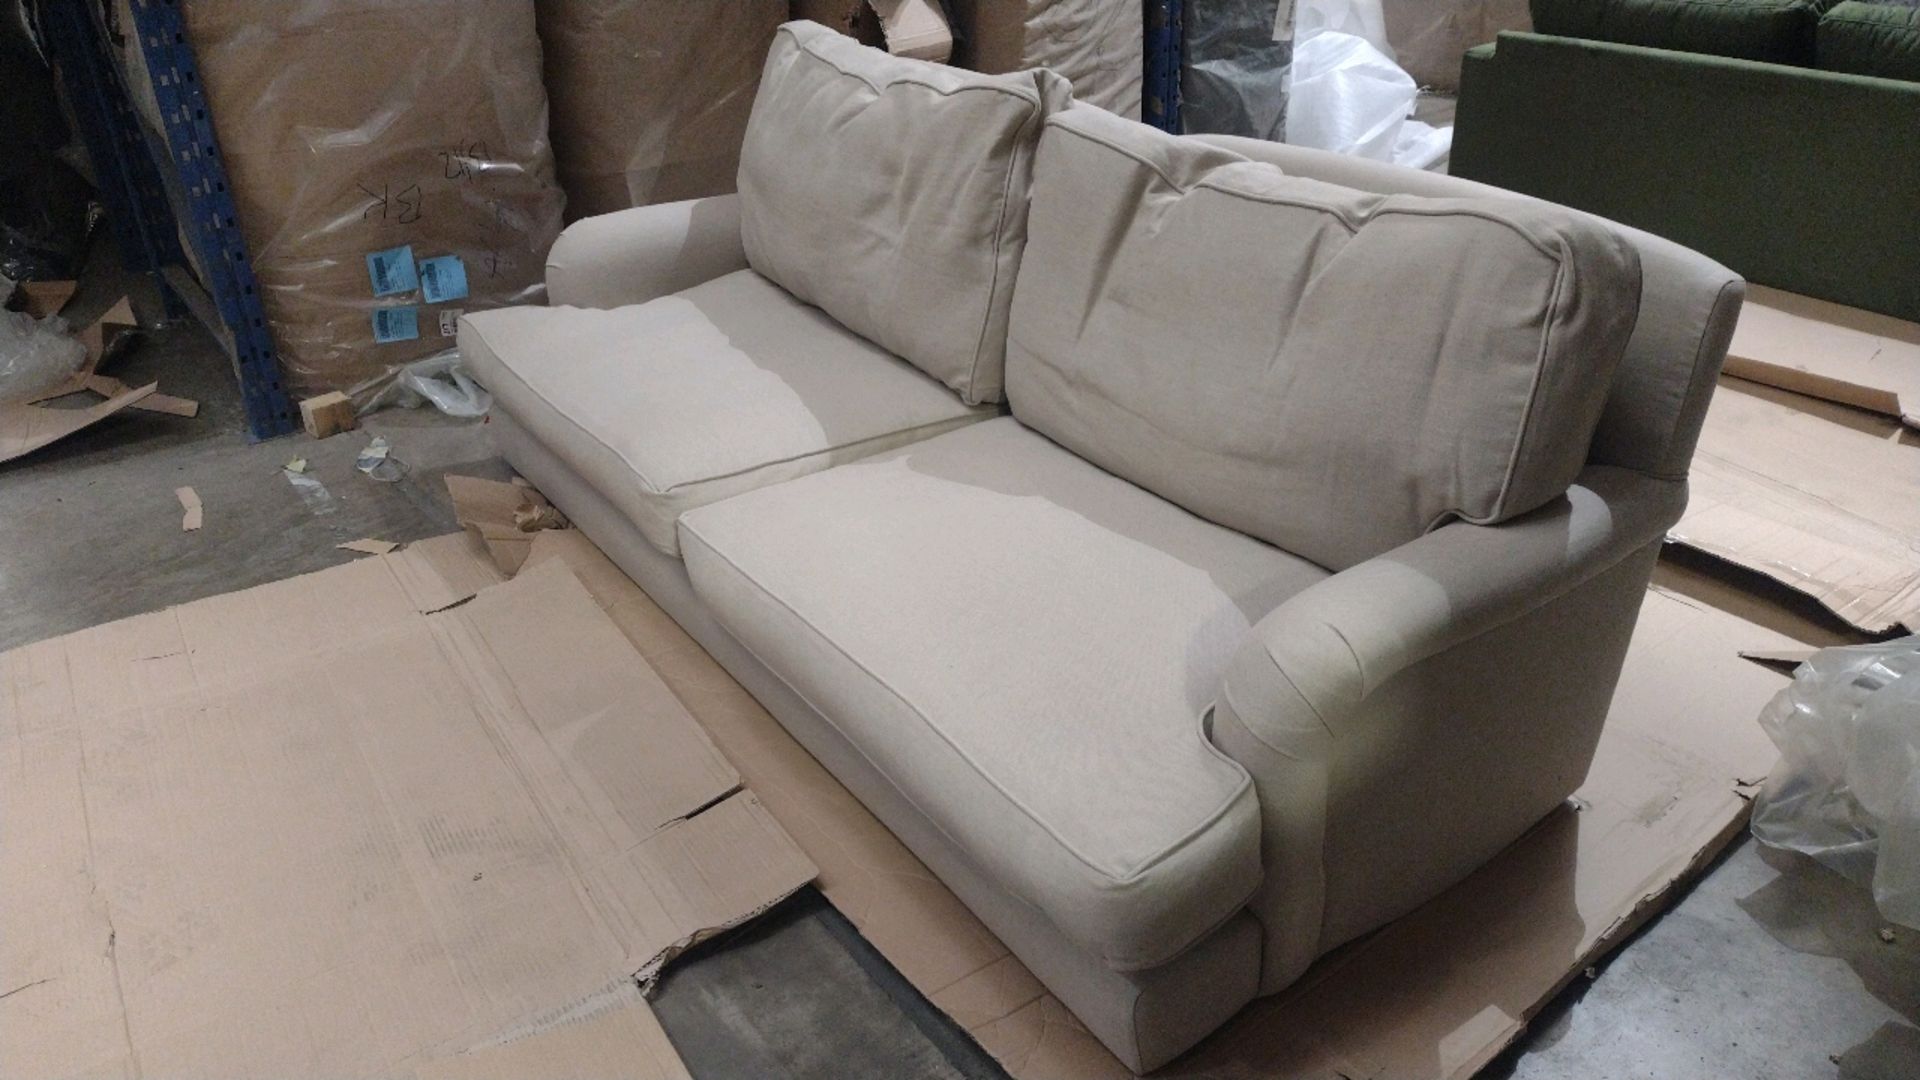 Bluebell 3 Seat Sofa In Pampas Hygge Smart Linen RRP - £2800 - Image 4 of 7